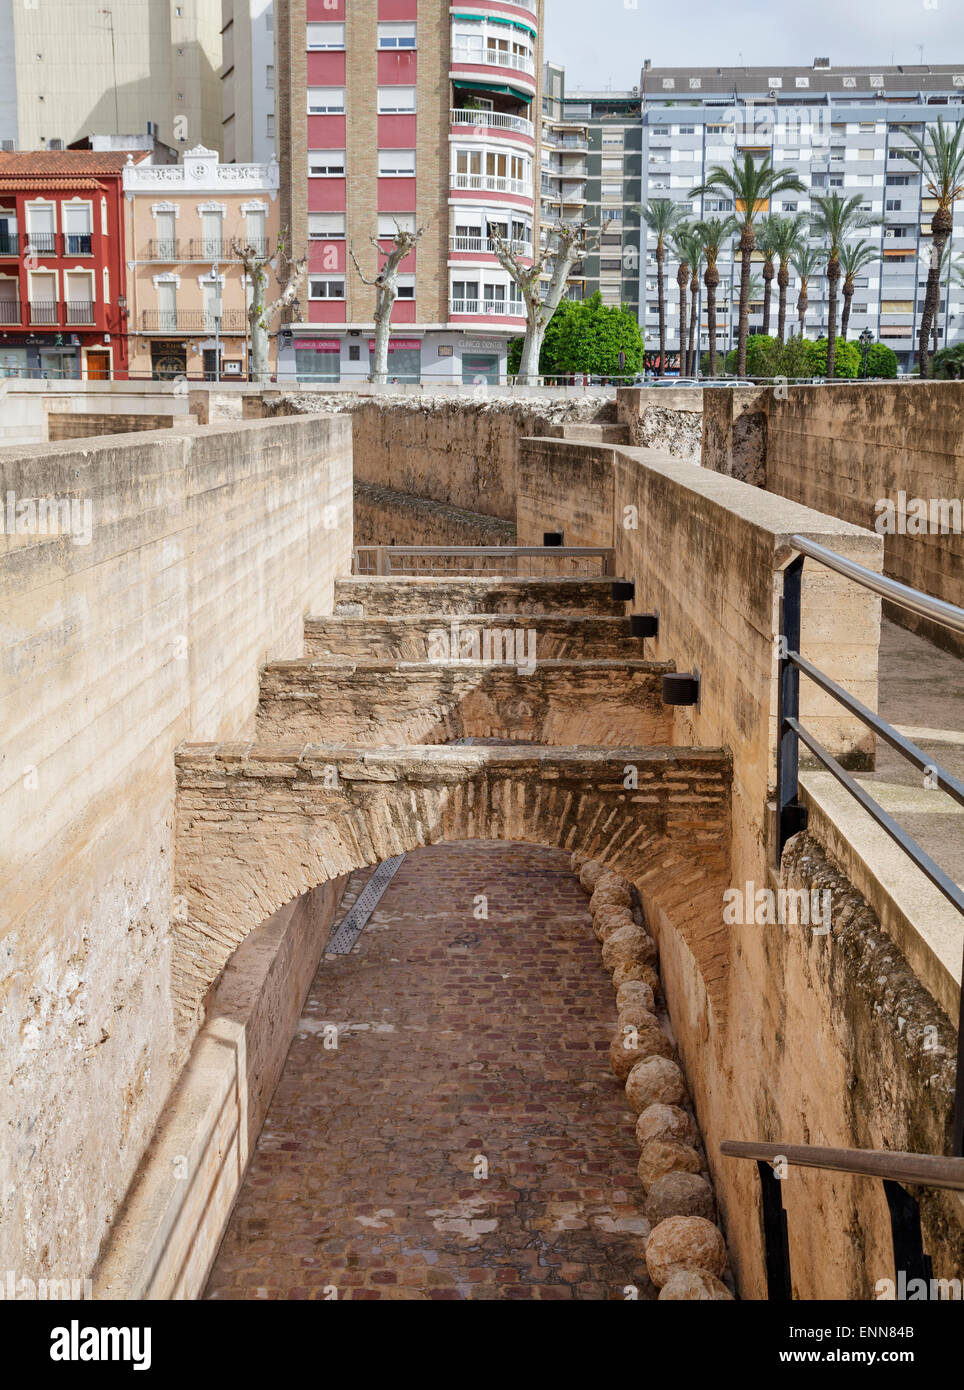 Remains of the old market, Alzira, Valencia, Spain Stock Photo